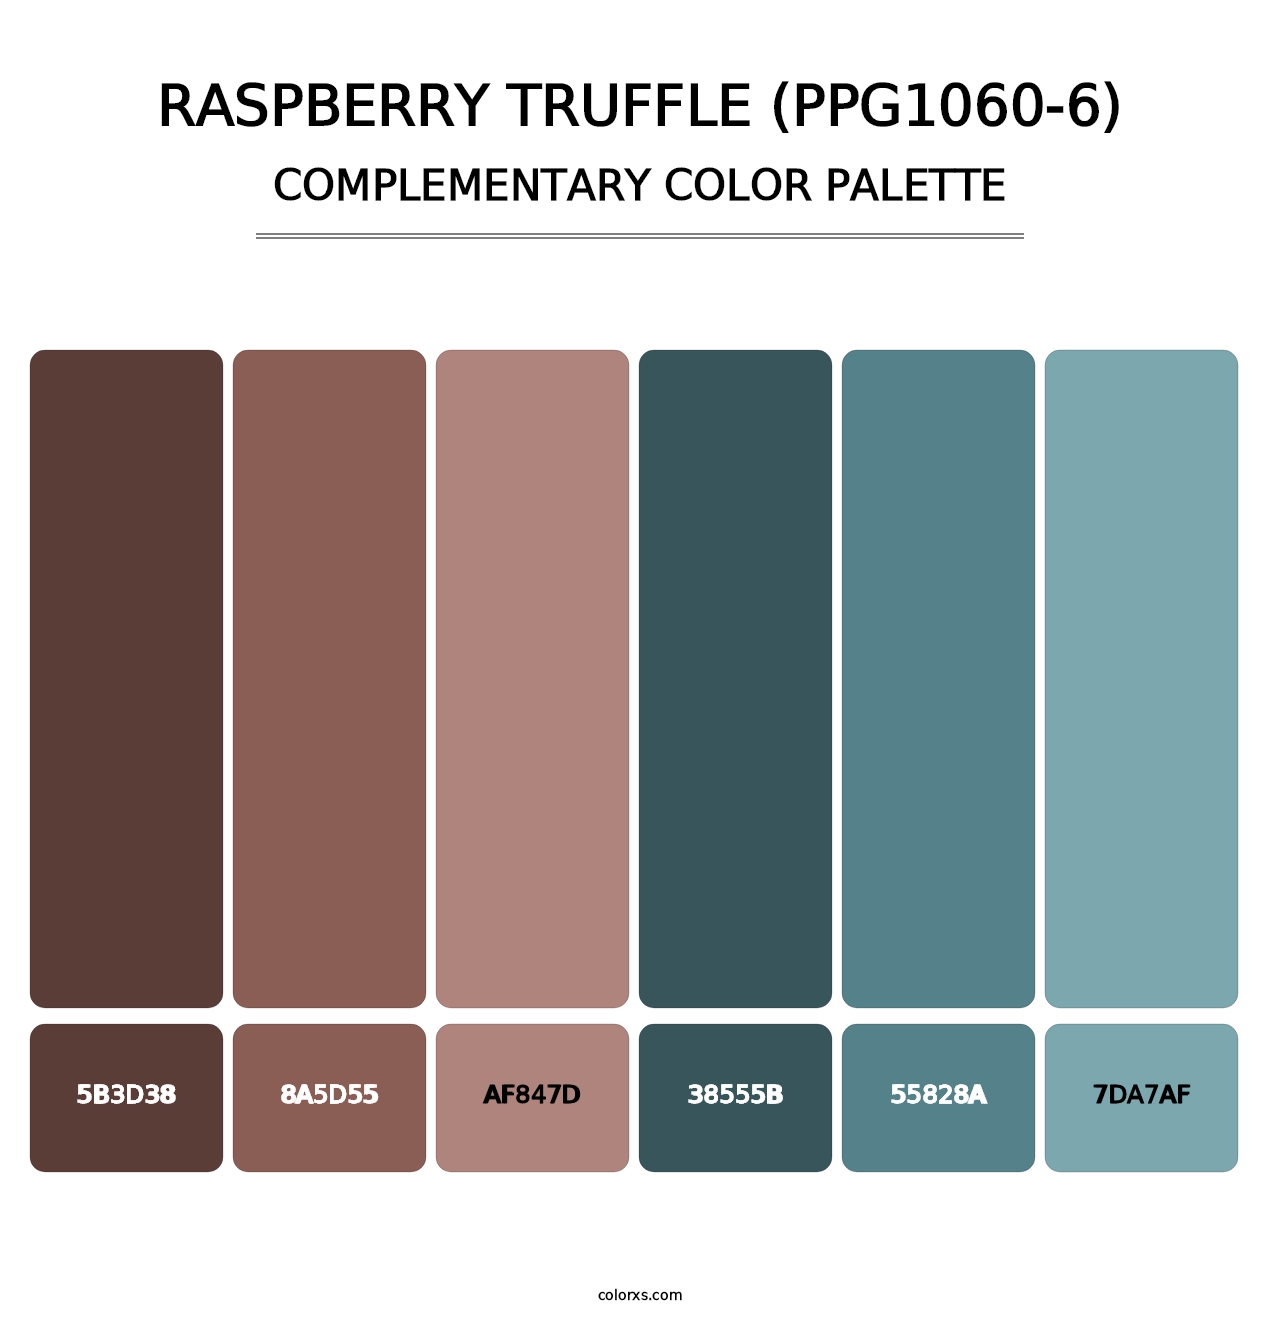 Raspberry Truffle (PPG1060-6) - Complementary Color Palette